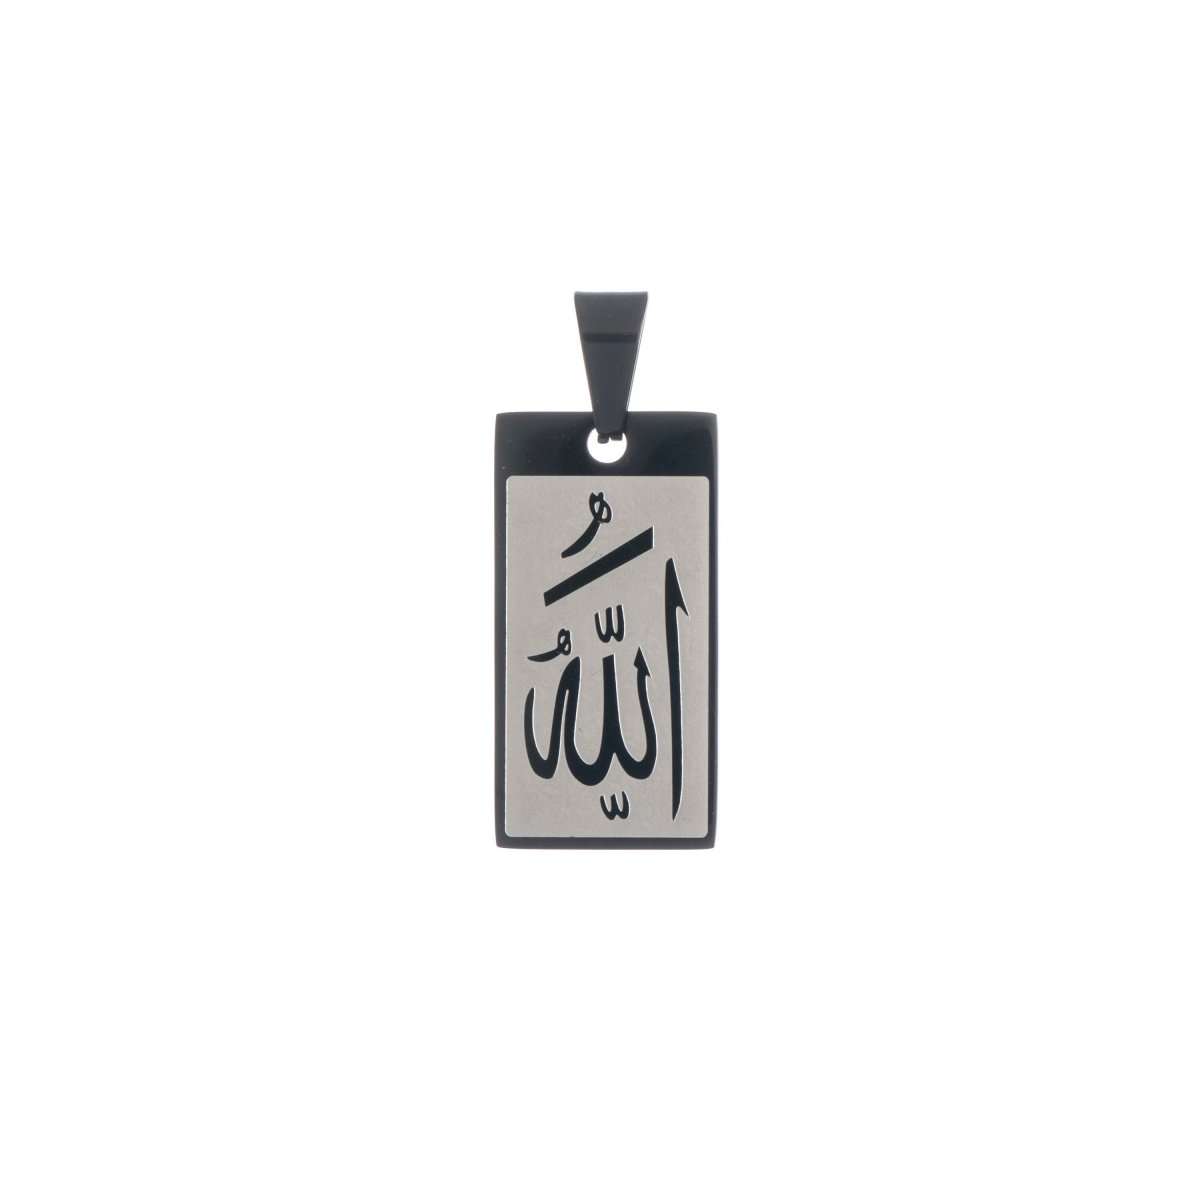 Gold, Silver Rectangular Allah Pendant Bar Frame Arabic Word Charm carved Charm for Men Necklace Jewelry Making Religious Necklace Supply J-477 - DLUXCA